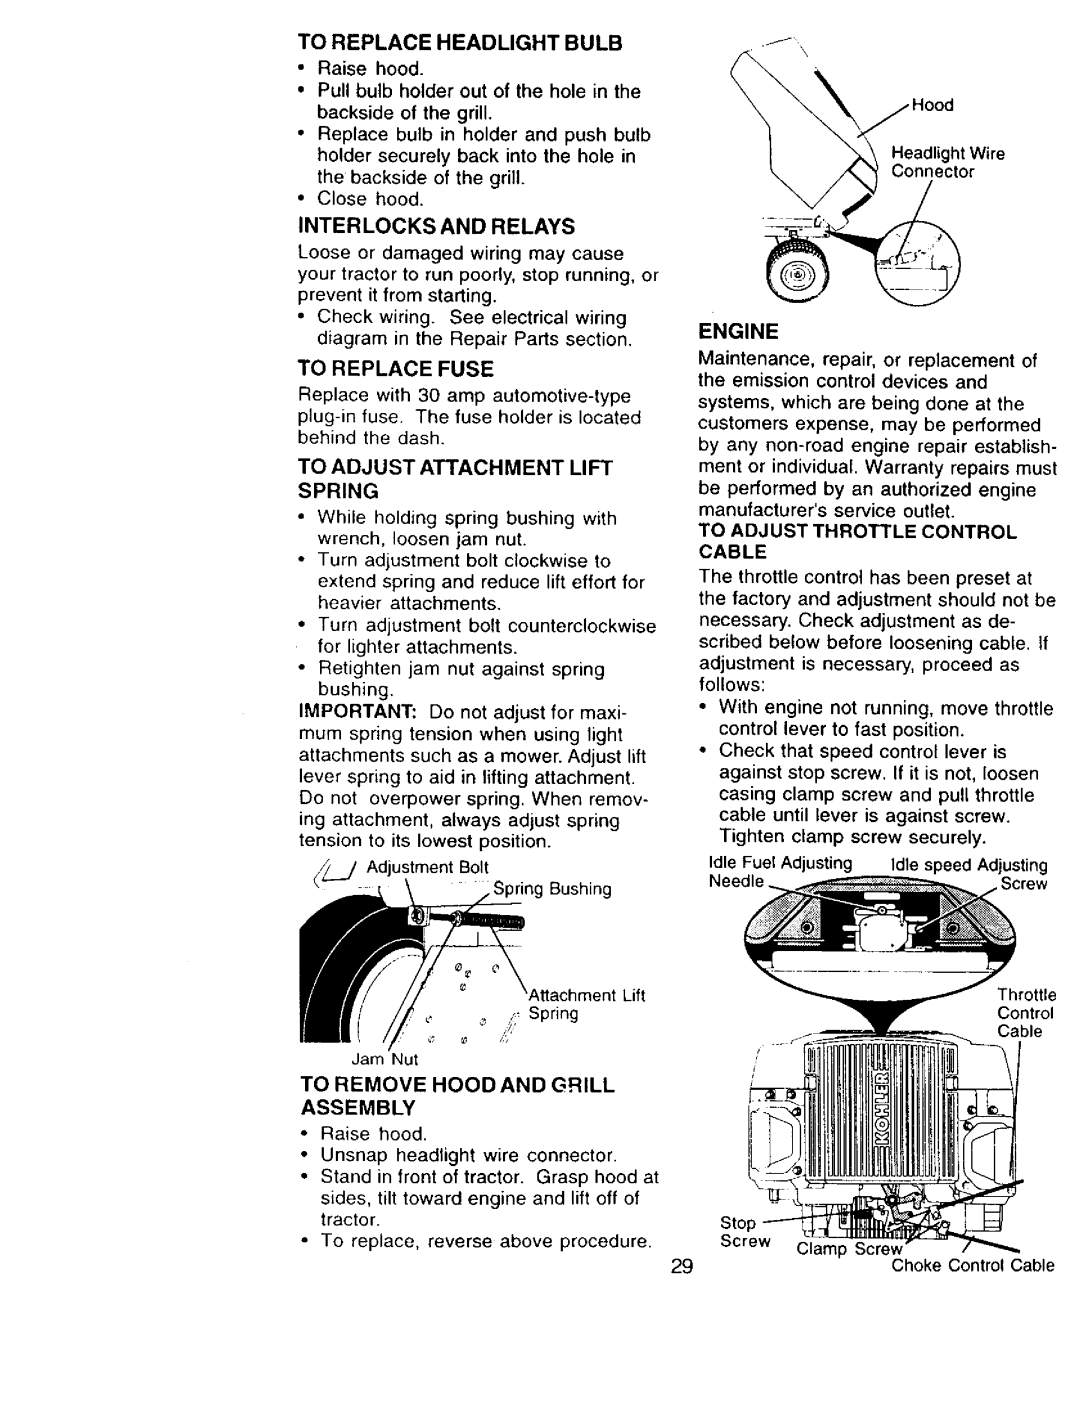 Craftsman 917.273322 To Replaceheadlightbulb, Interlocksandrelays, To Replacefuse, To Adjust Attachment Lift Spring 